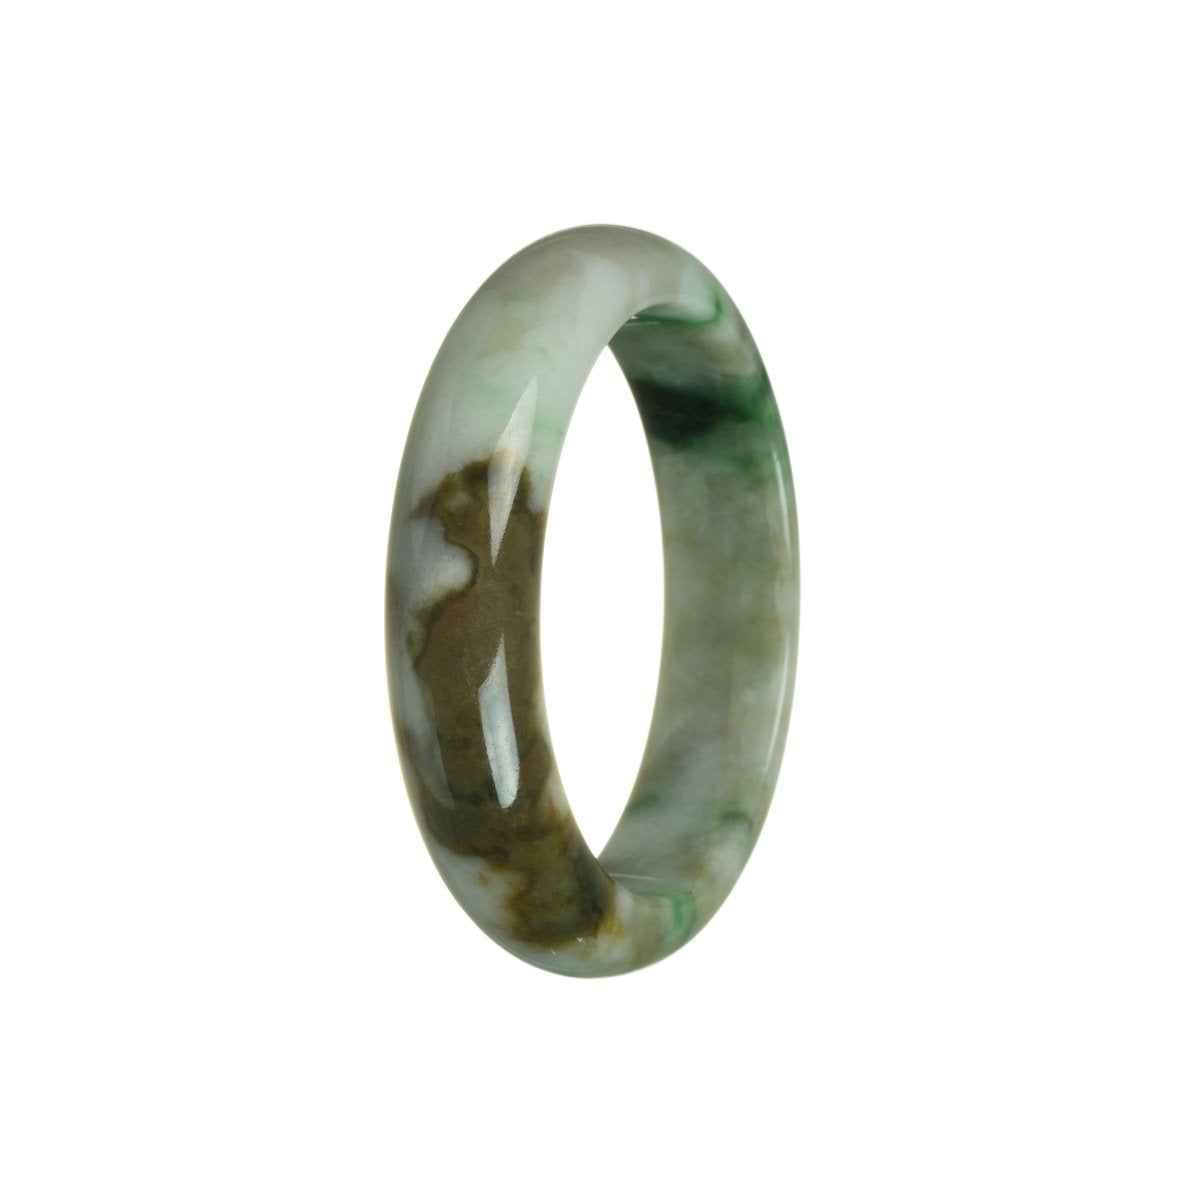 Certified Grade A Green with Brown and White Burma Jade Bangle Bracelet - 55mm Half Moon